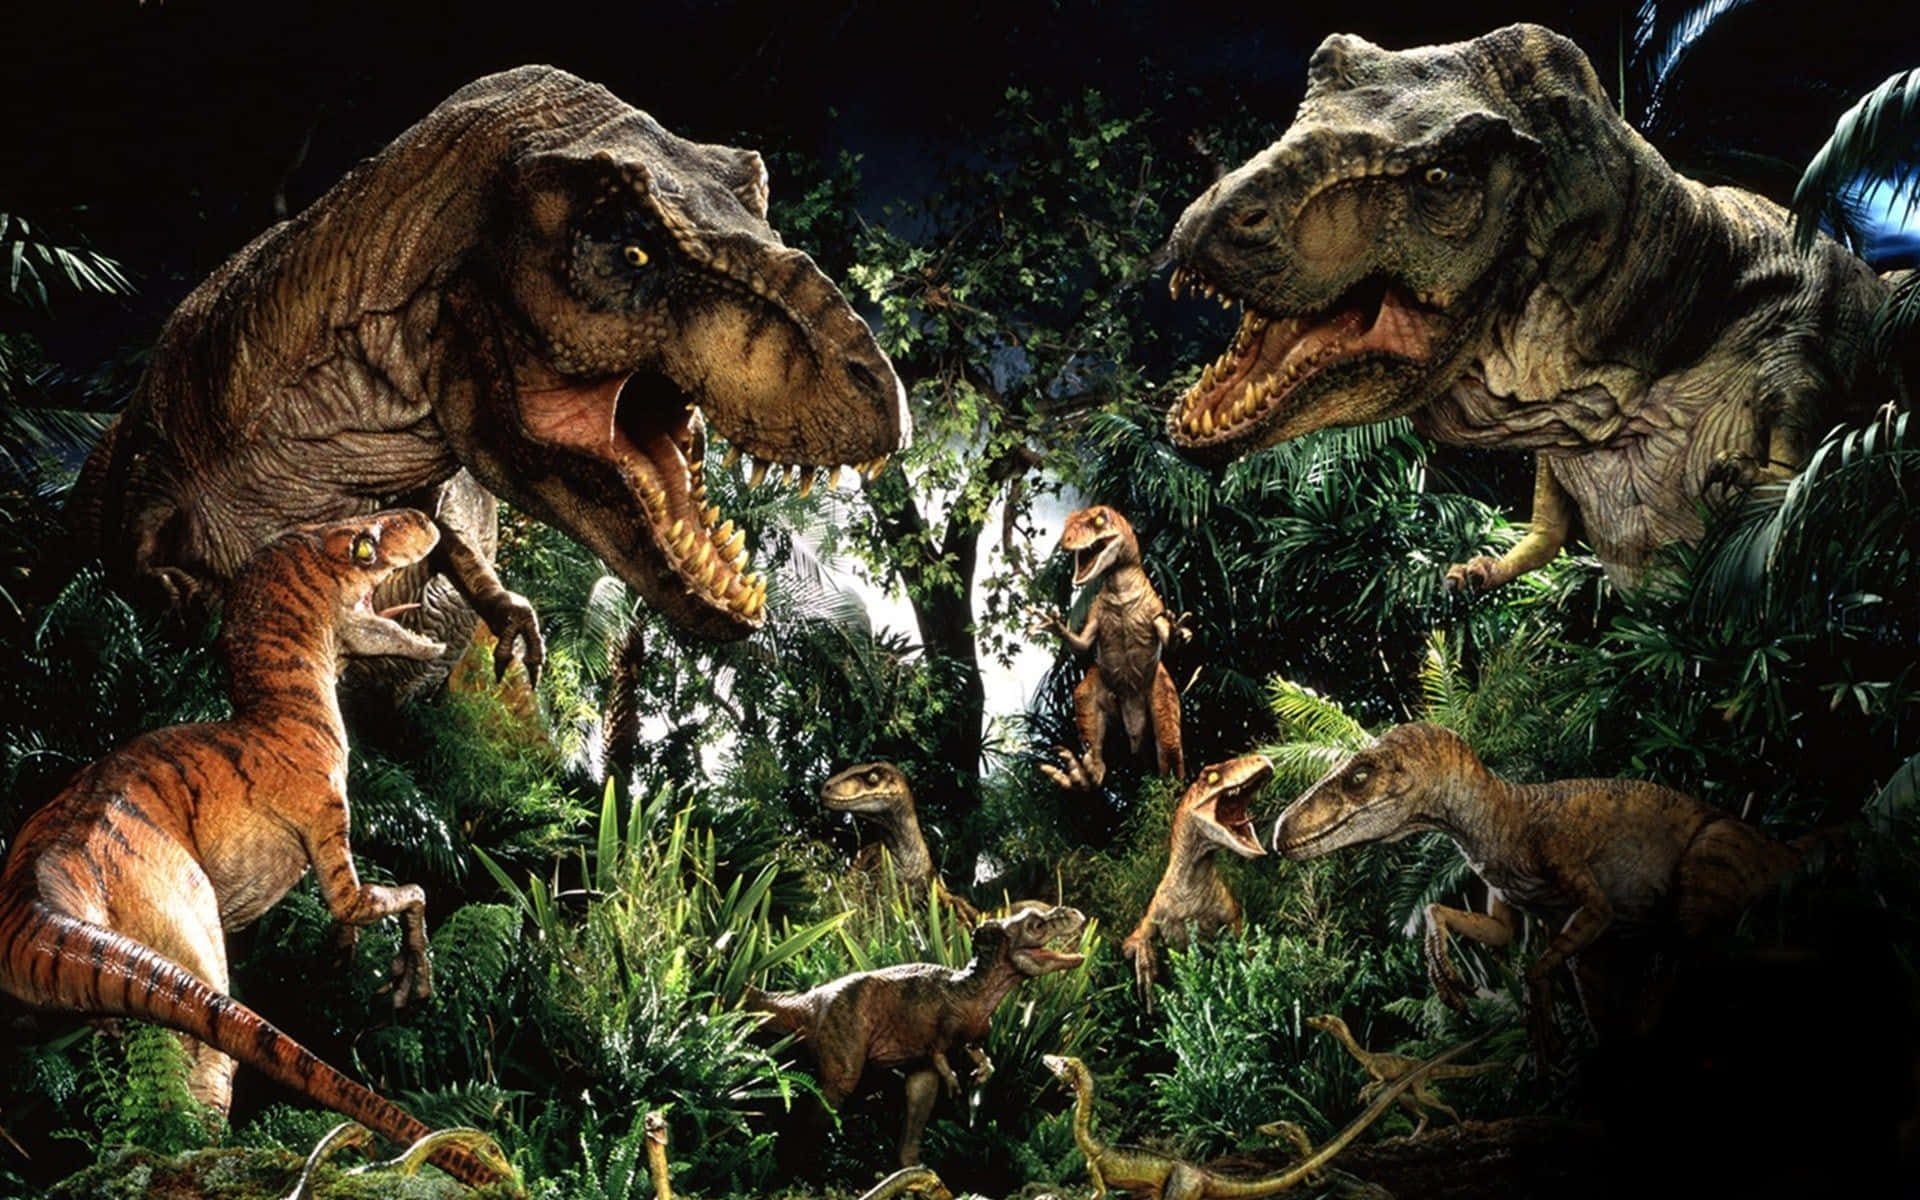 Get ready to explore new prehistoric landscapes!